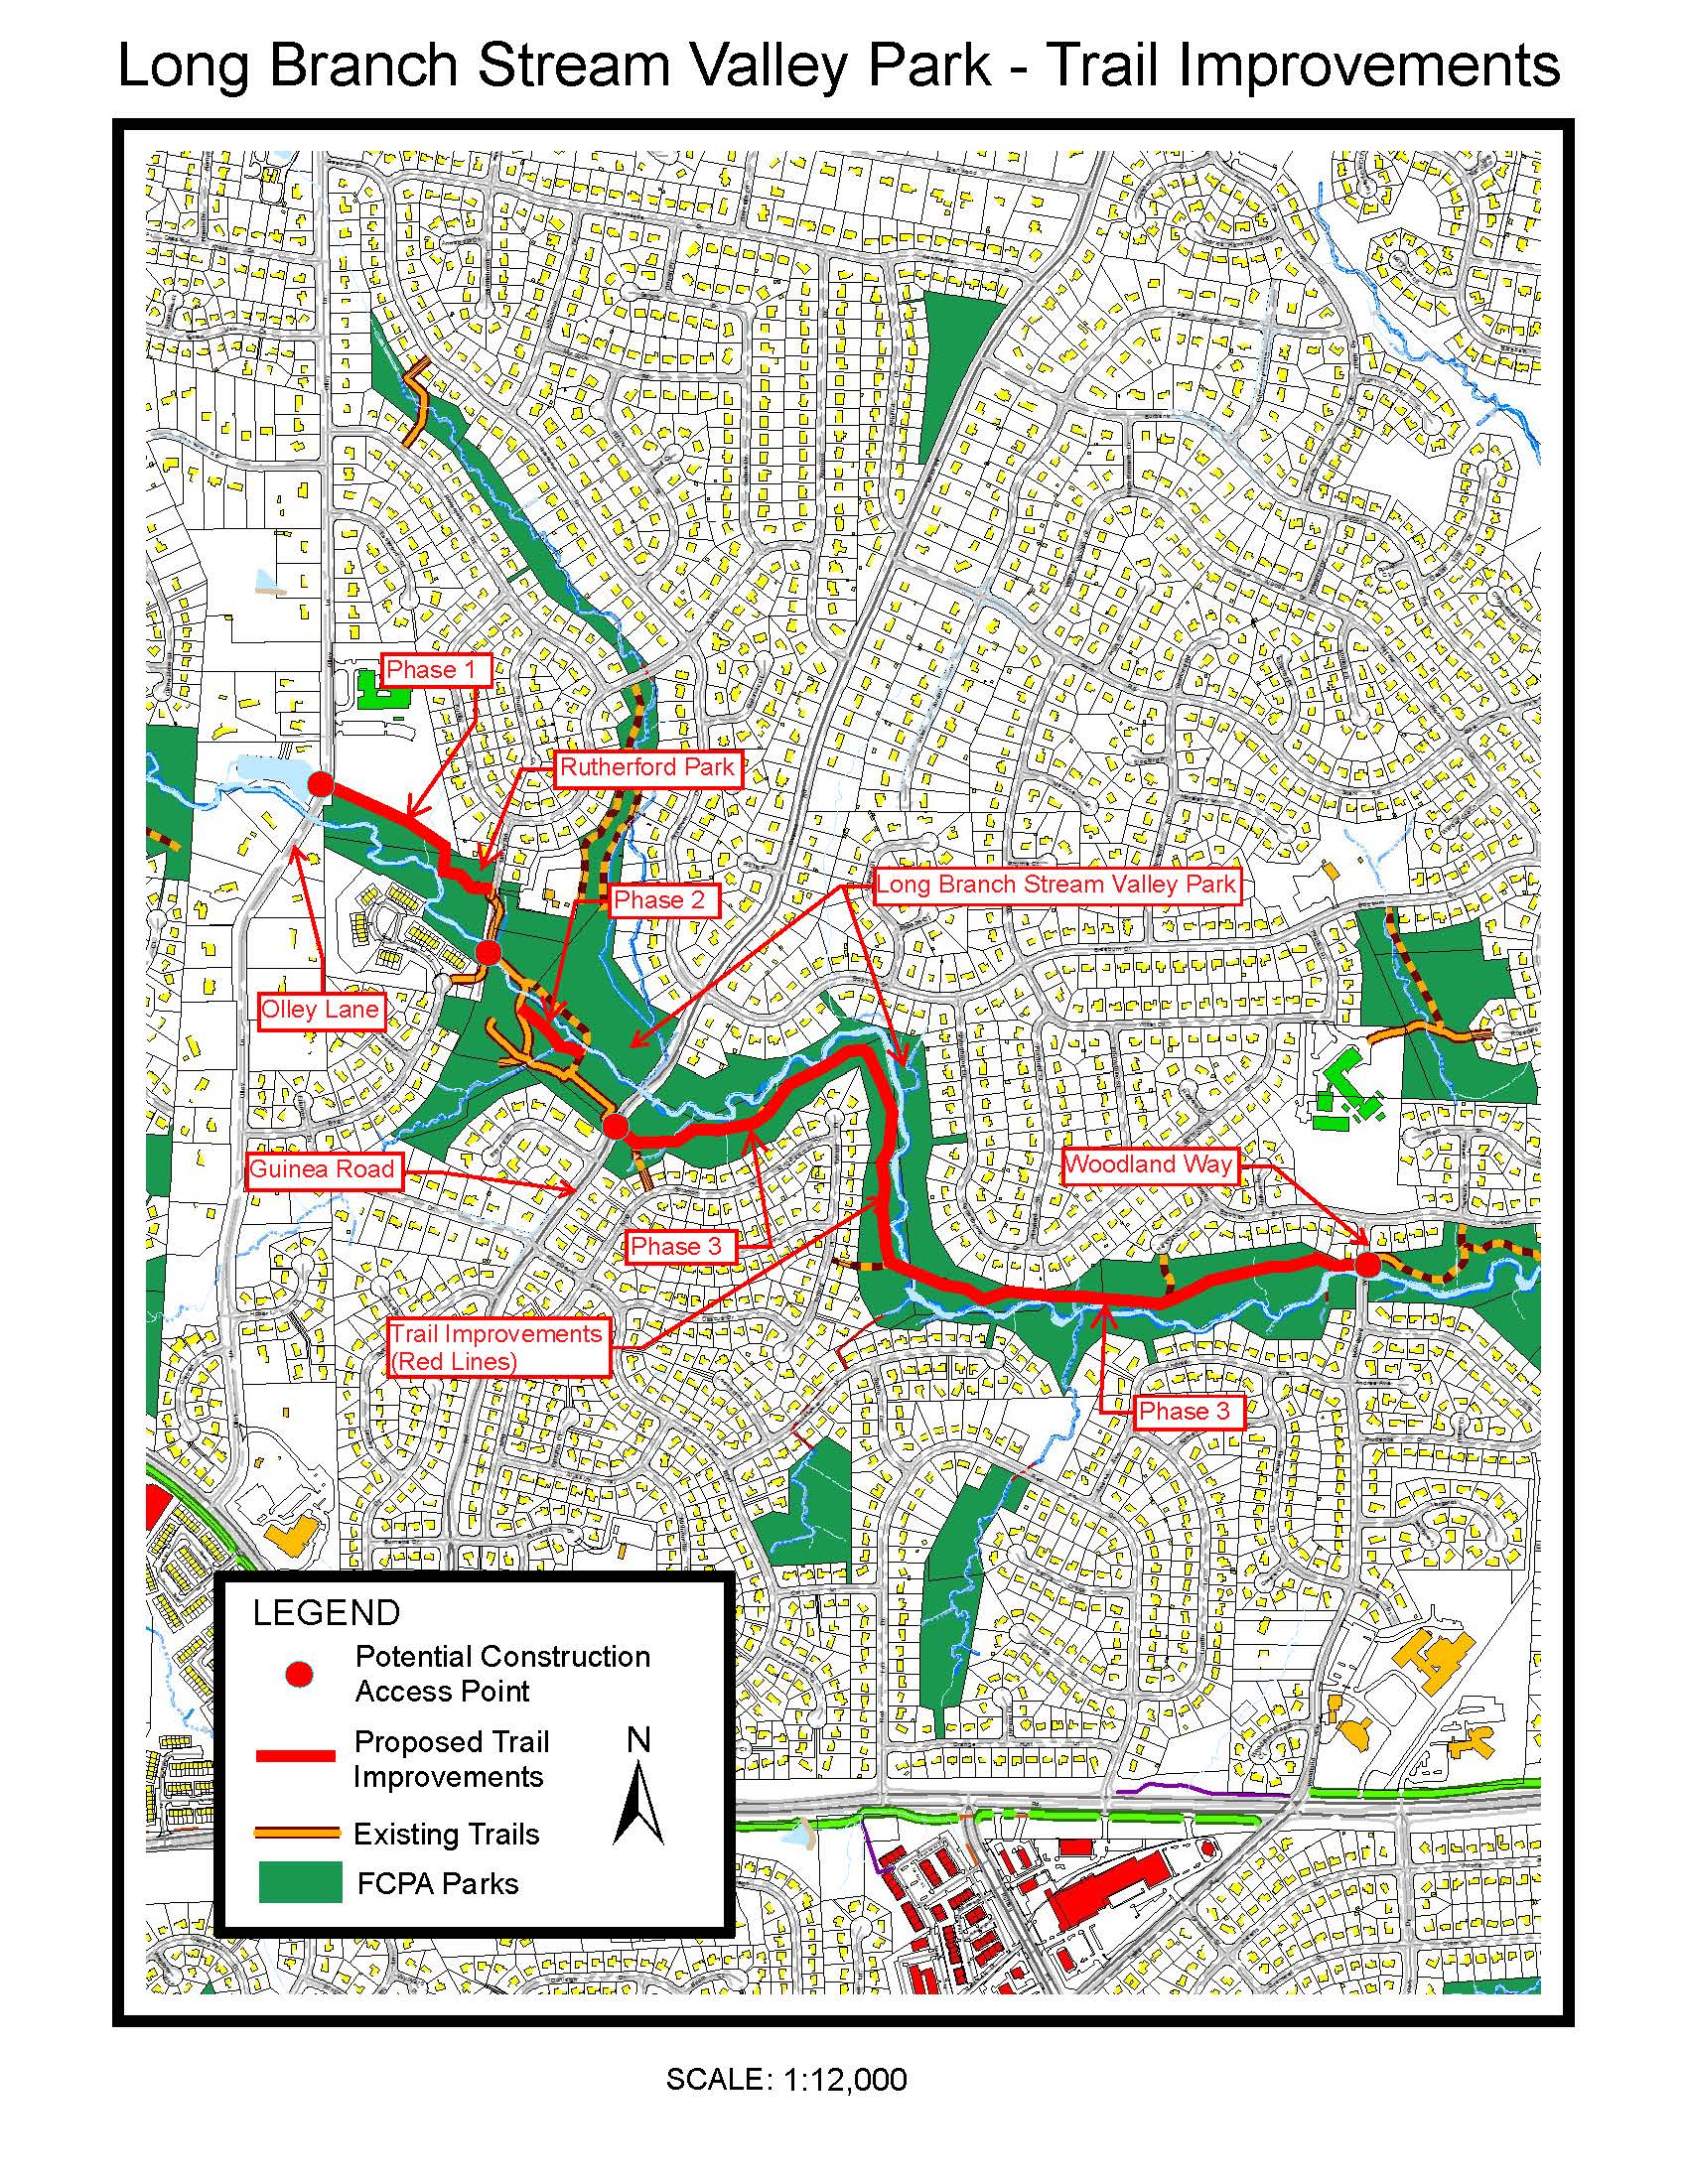 Trail Improvements Slated for Long Branch Stream Valley Park.